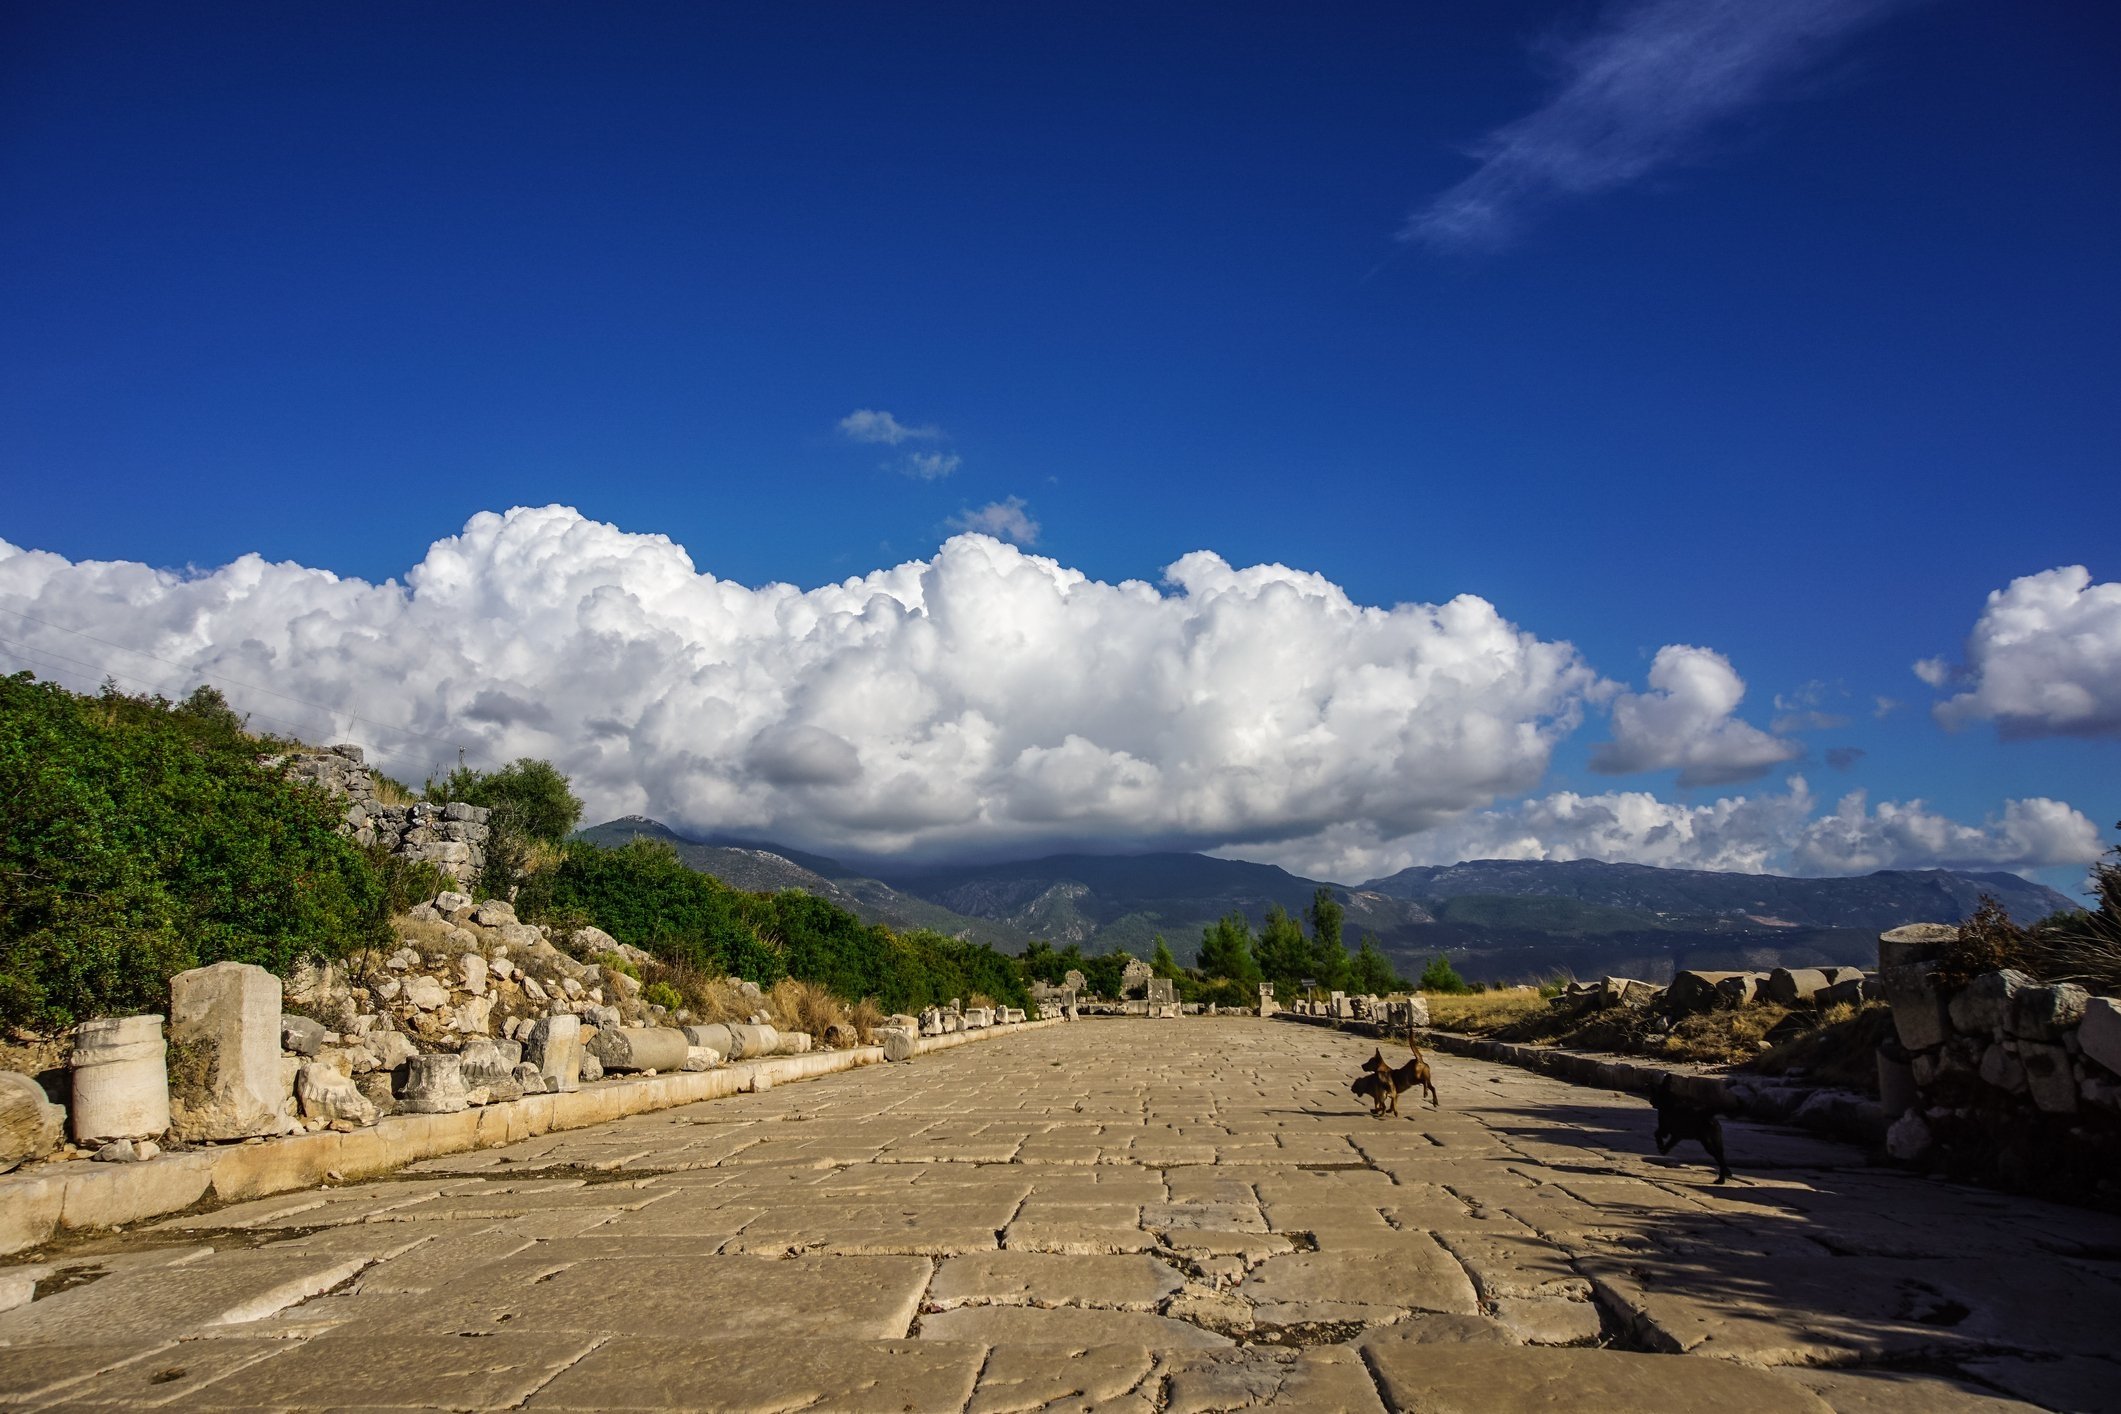 Xanthos was once the capital of Lycia and famous for its marbles. (iStock Photo)